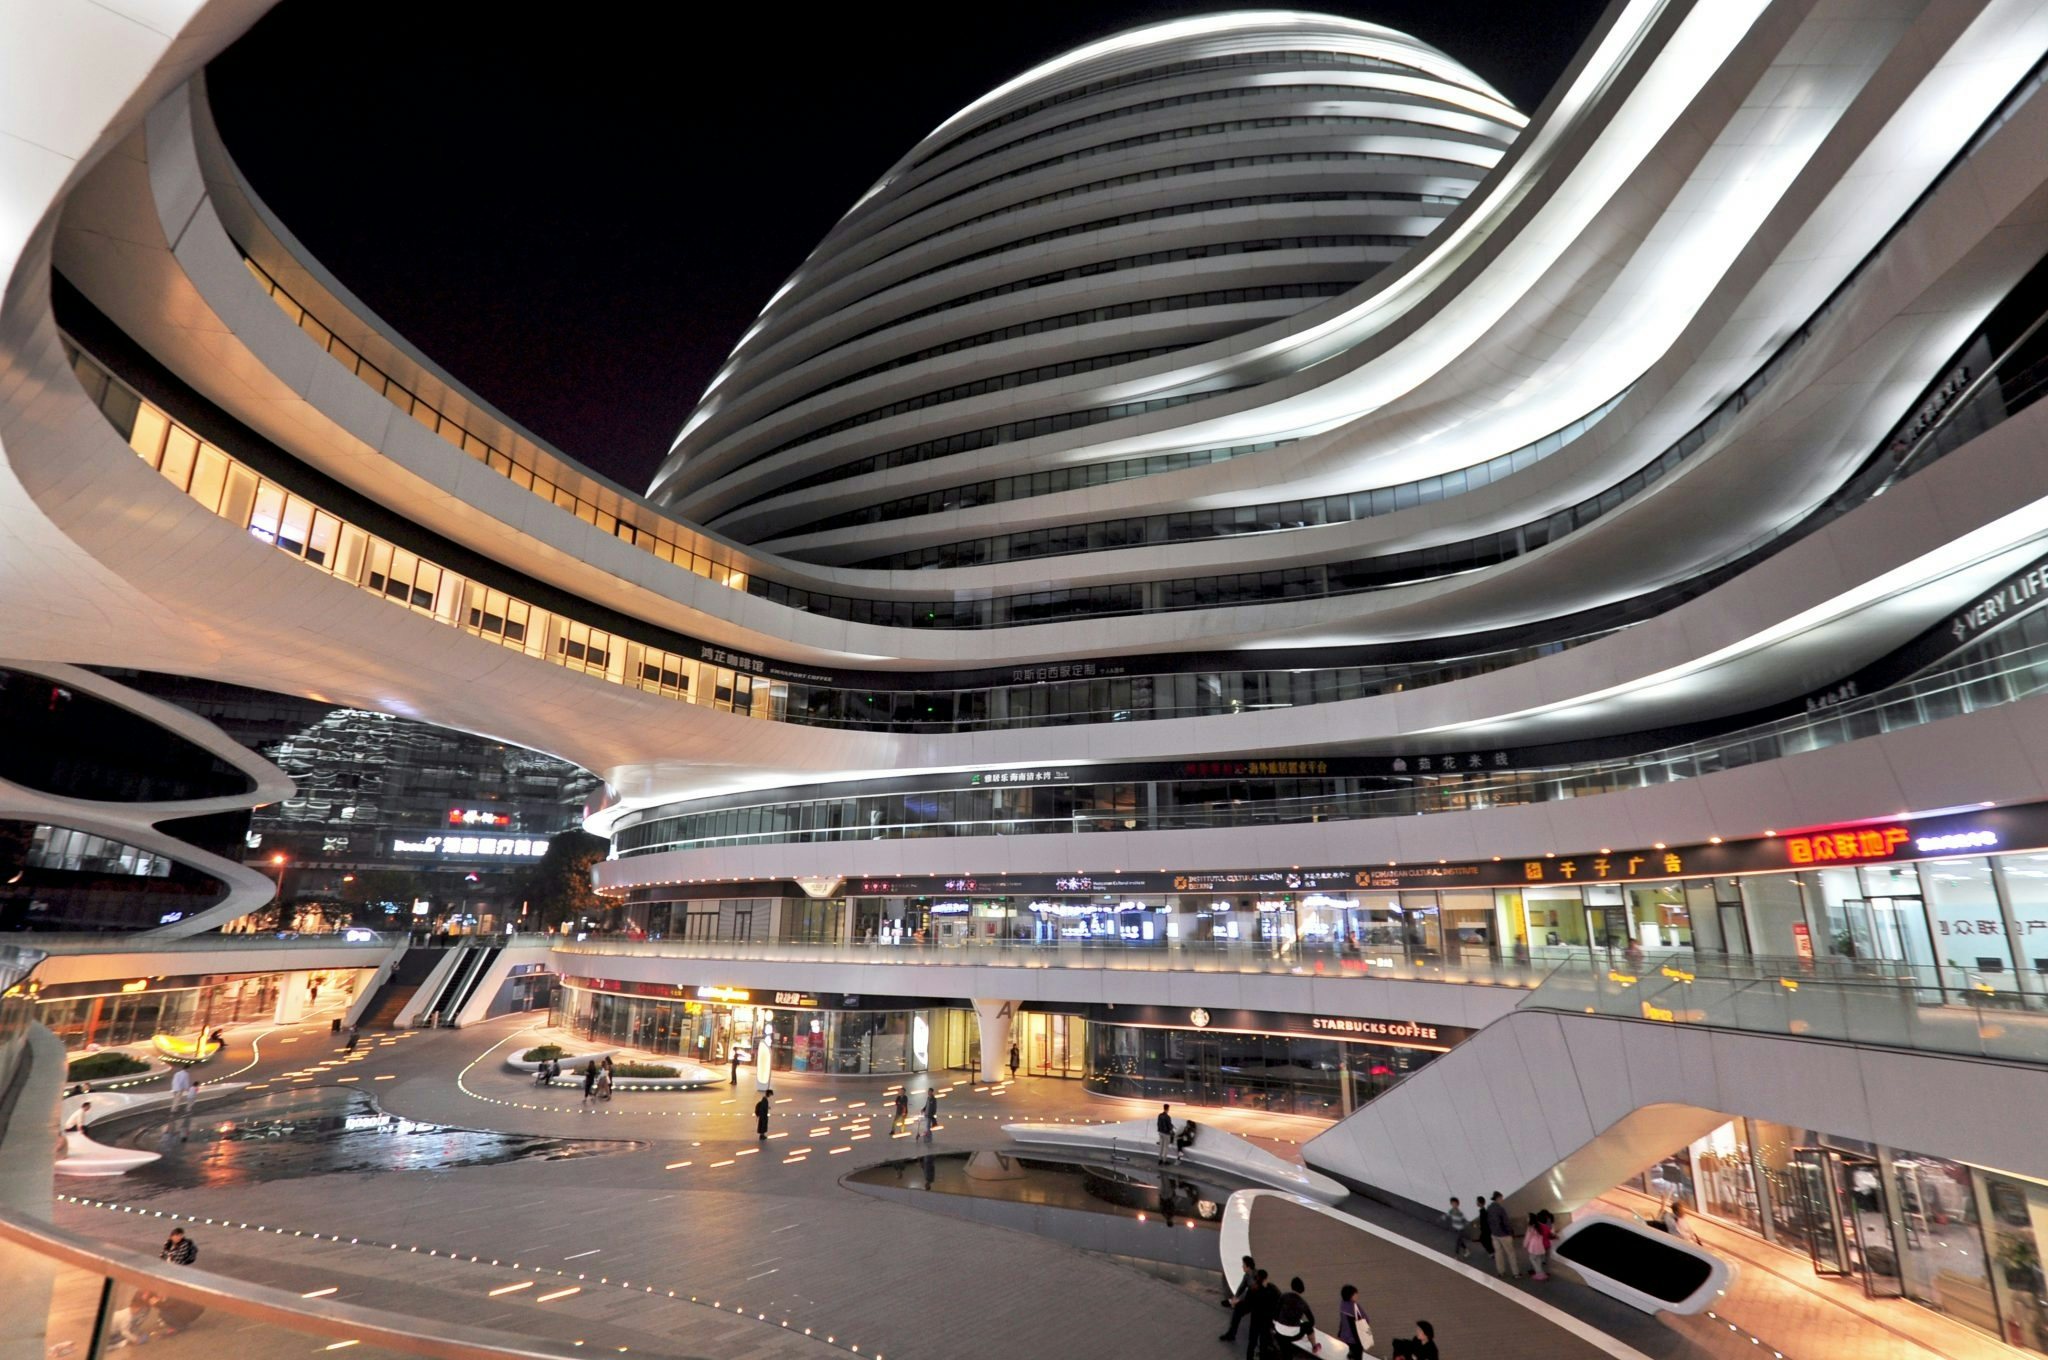 Beijing's Galaxy SOHO, an office and retail space designed by Zaha Hadid Architects. Photo: Shutterstock